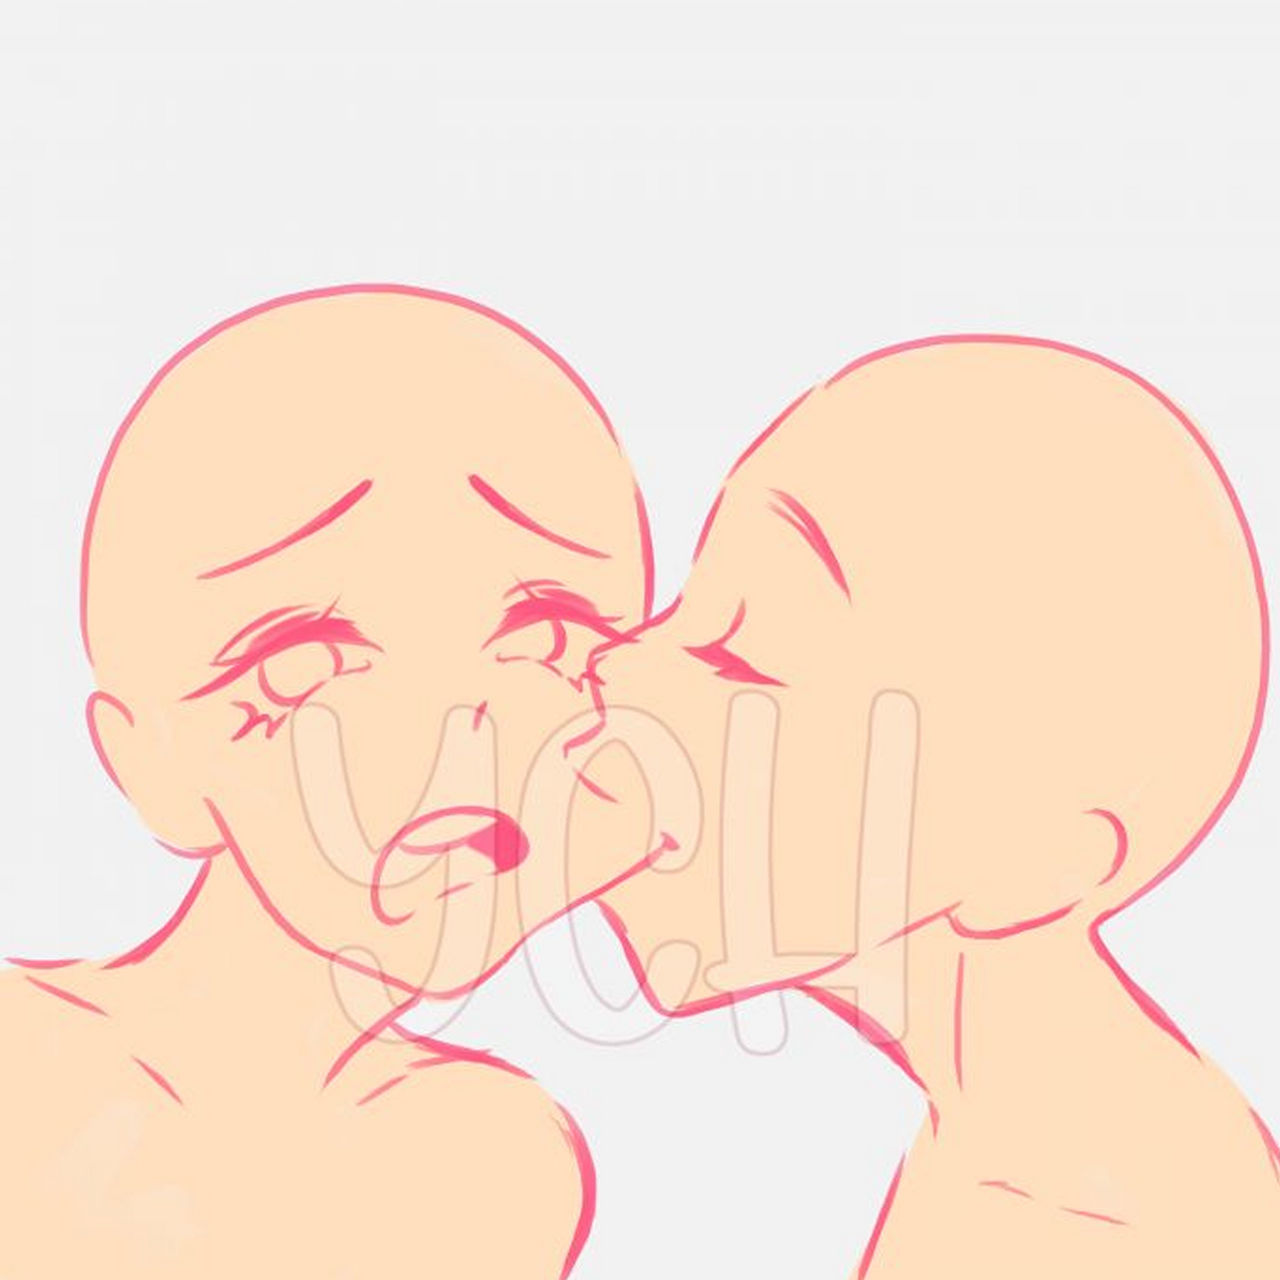 Cheek kiss YCH - YCH.Commishes